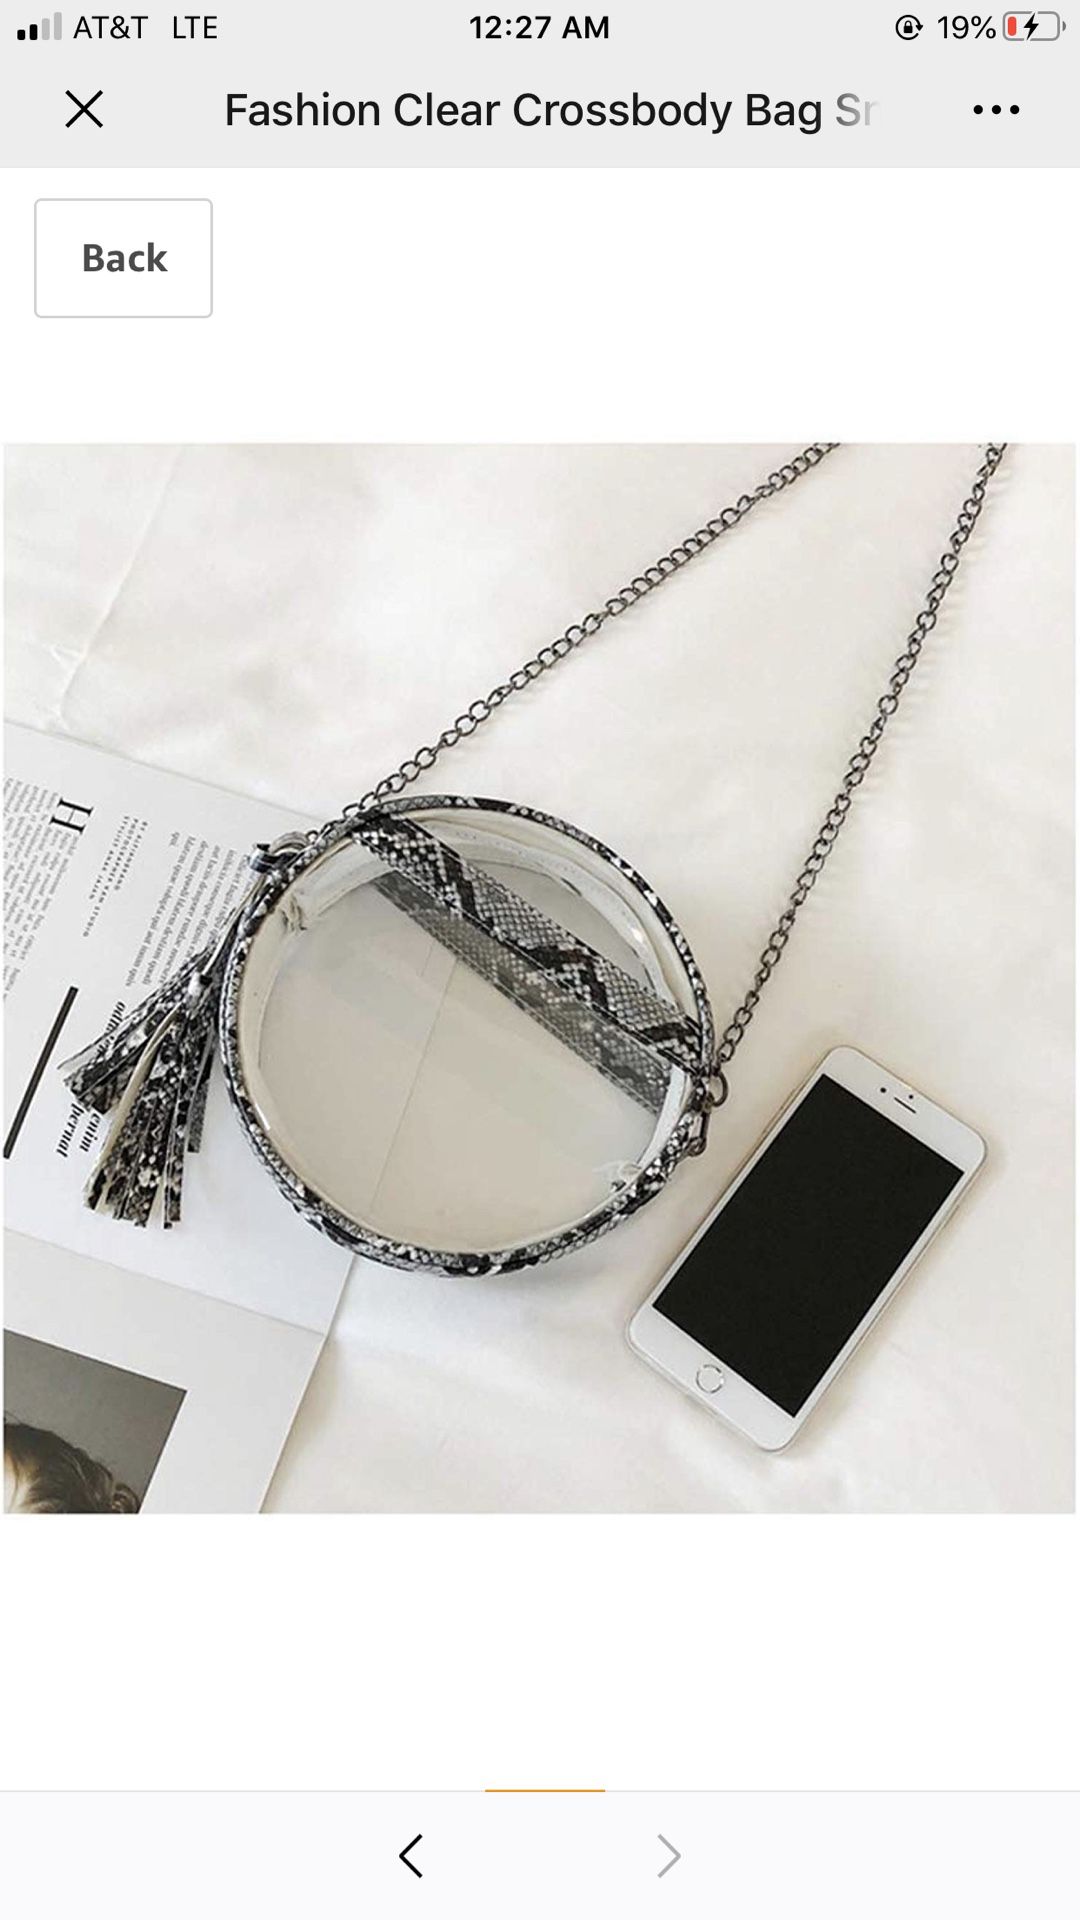 Fashion Clear Crossbody Bag Snakeskin Fringe Shoulder Bag Transparent Purse with Adjustable Chain or Leather Strap for Women Fashion Clear Crossbody